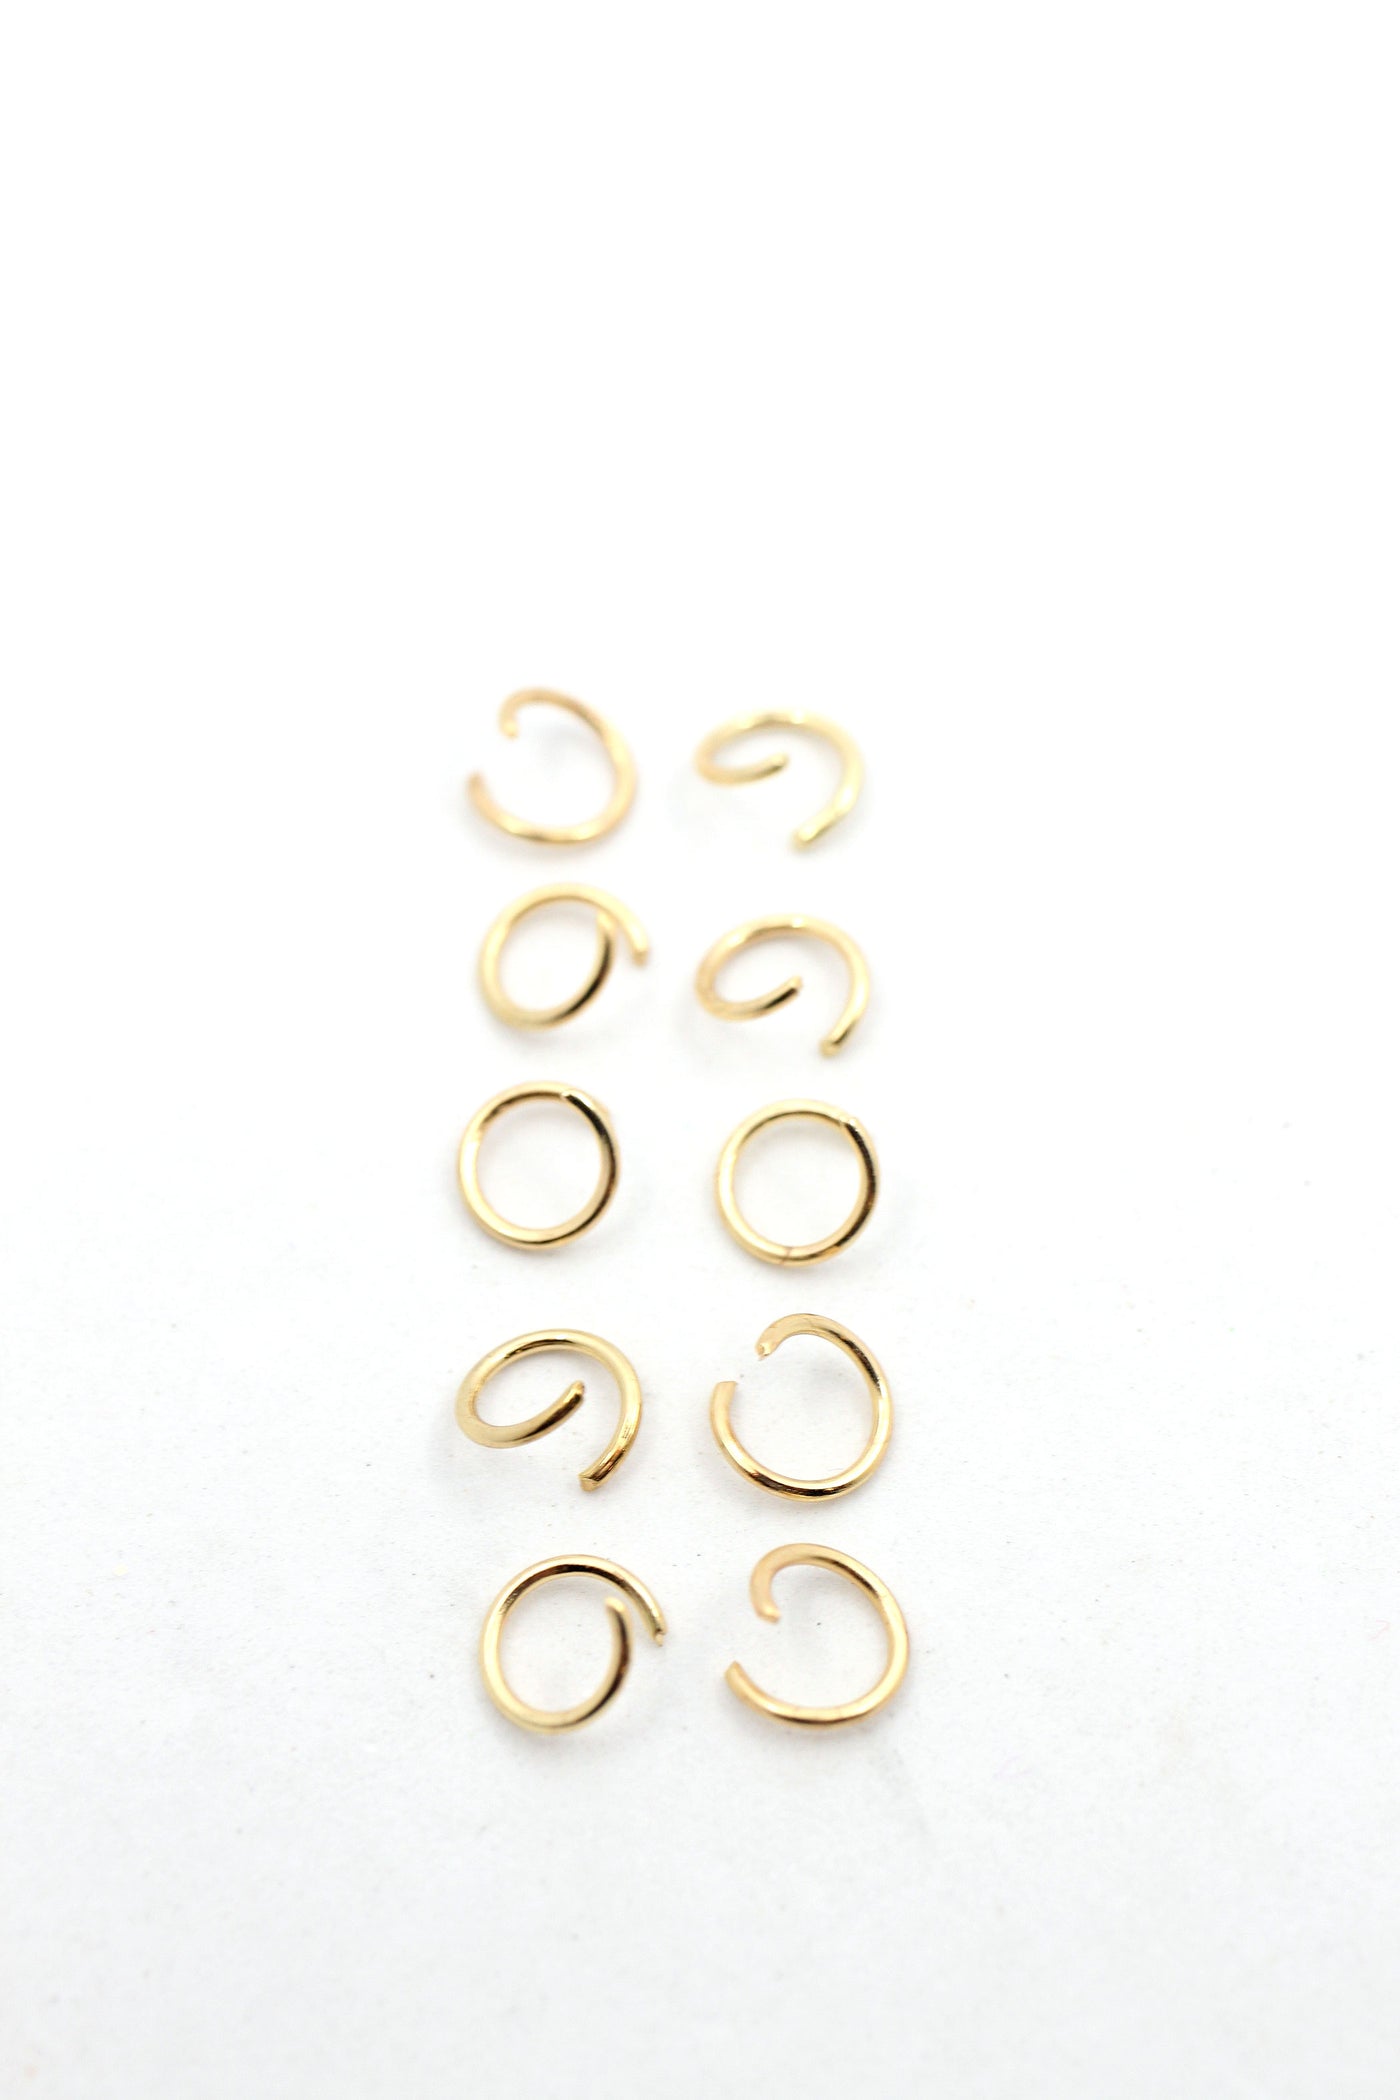 8mm/18 gauge, 10mm/14 gauge Jump Rings, Gold Plated, Open, Round